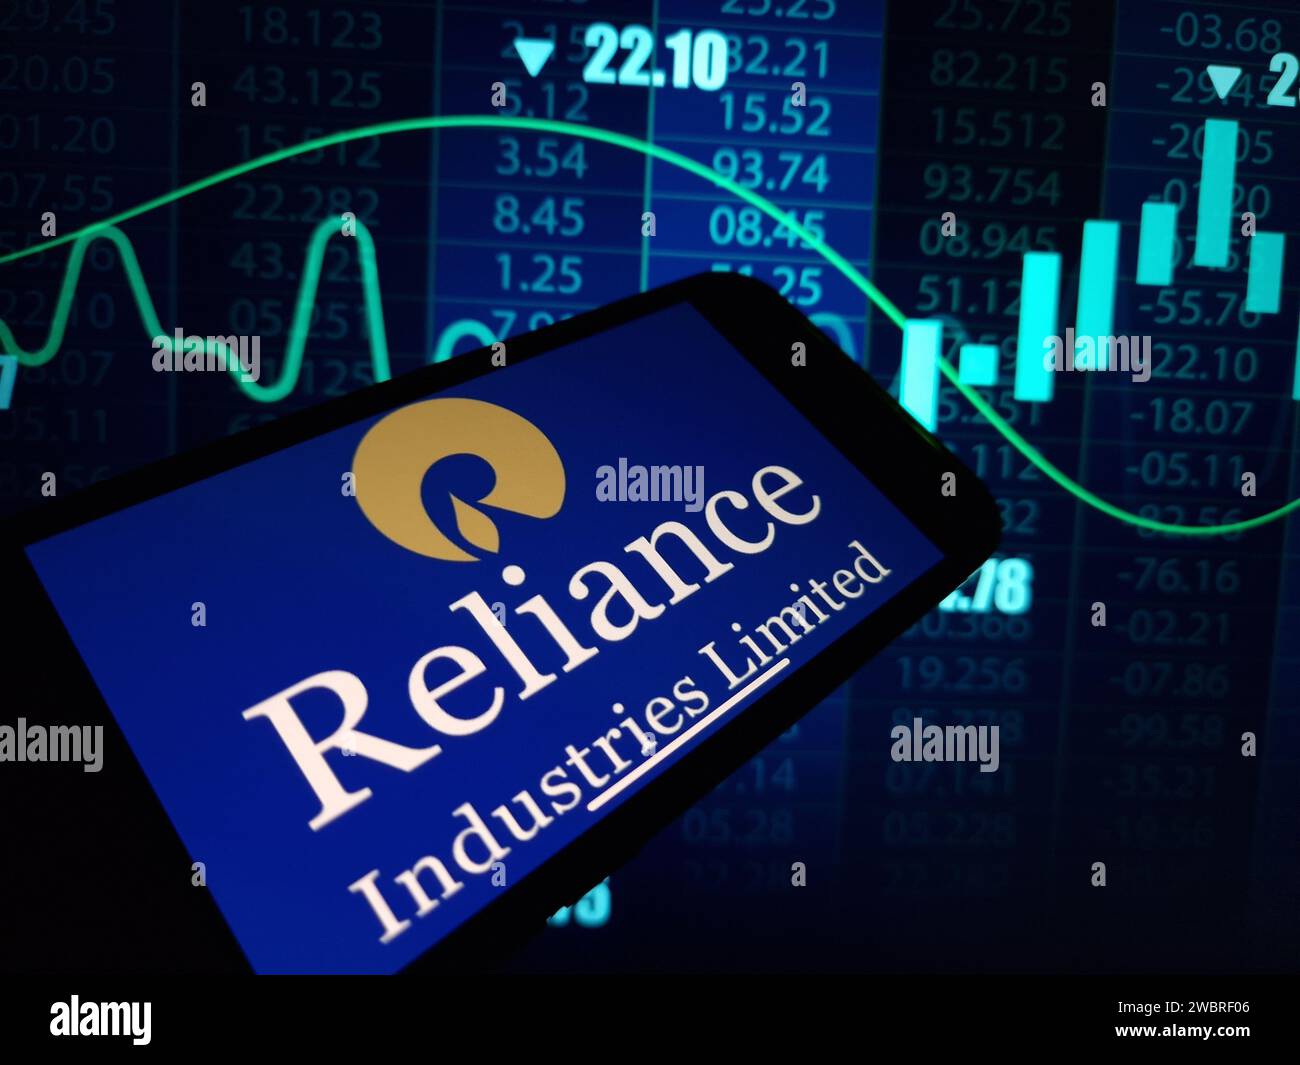 Konskie, Poland - January 03, 2024: Reliance Industries Limited company logo displayed on mobile phone screen Stock Photo